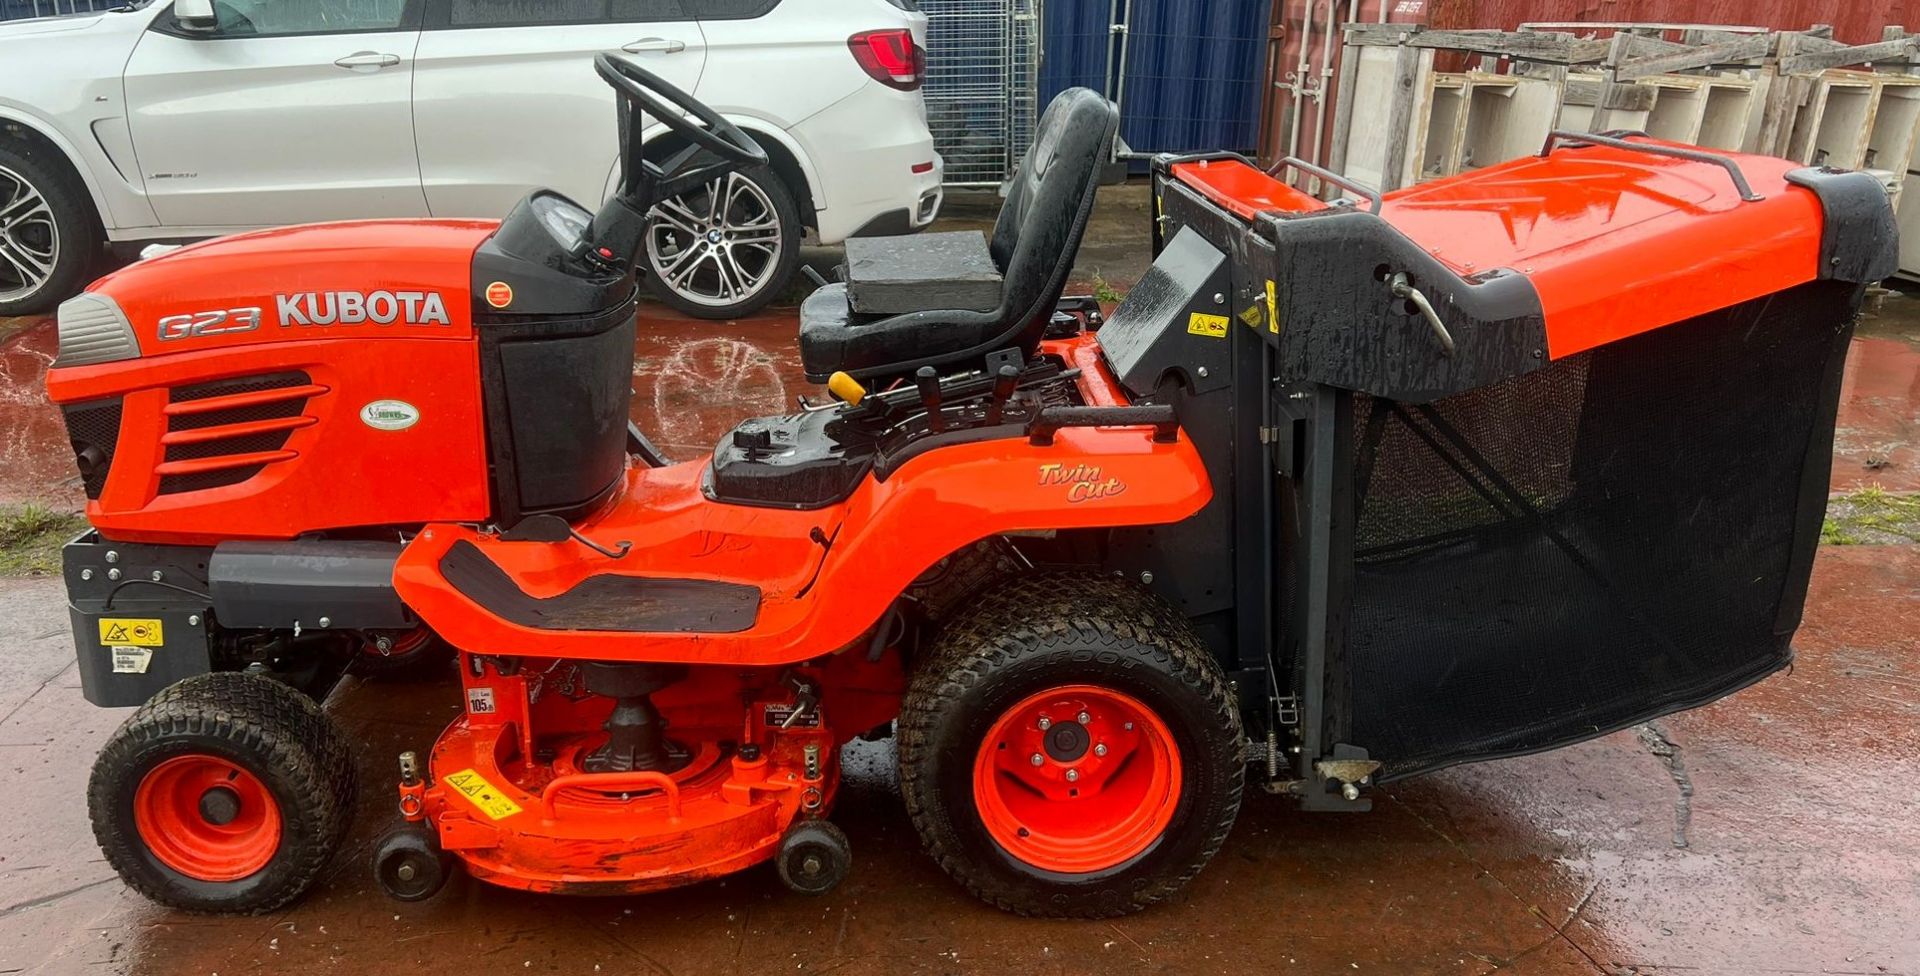 A Kubota G23LD48UK Twin Cut 48in 2WD Ride On Lawns Mower with Grass Box, Serial No.20710 (2012), - Image 4 of 14